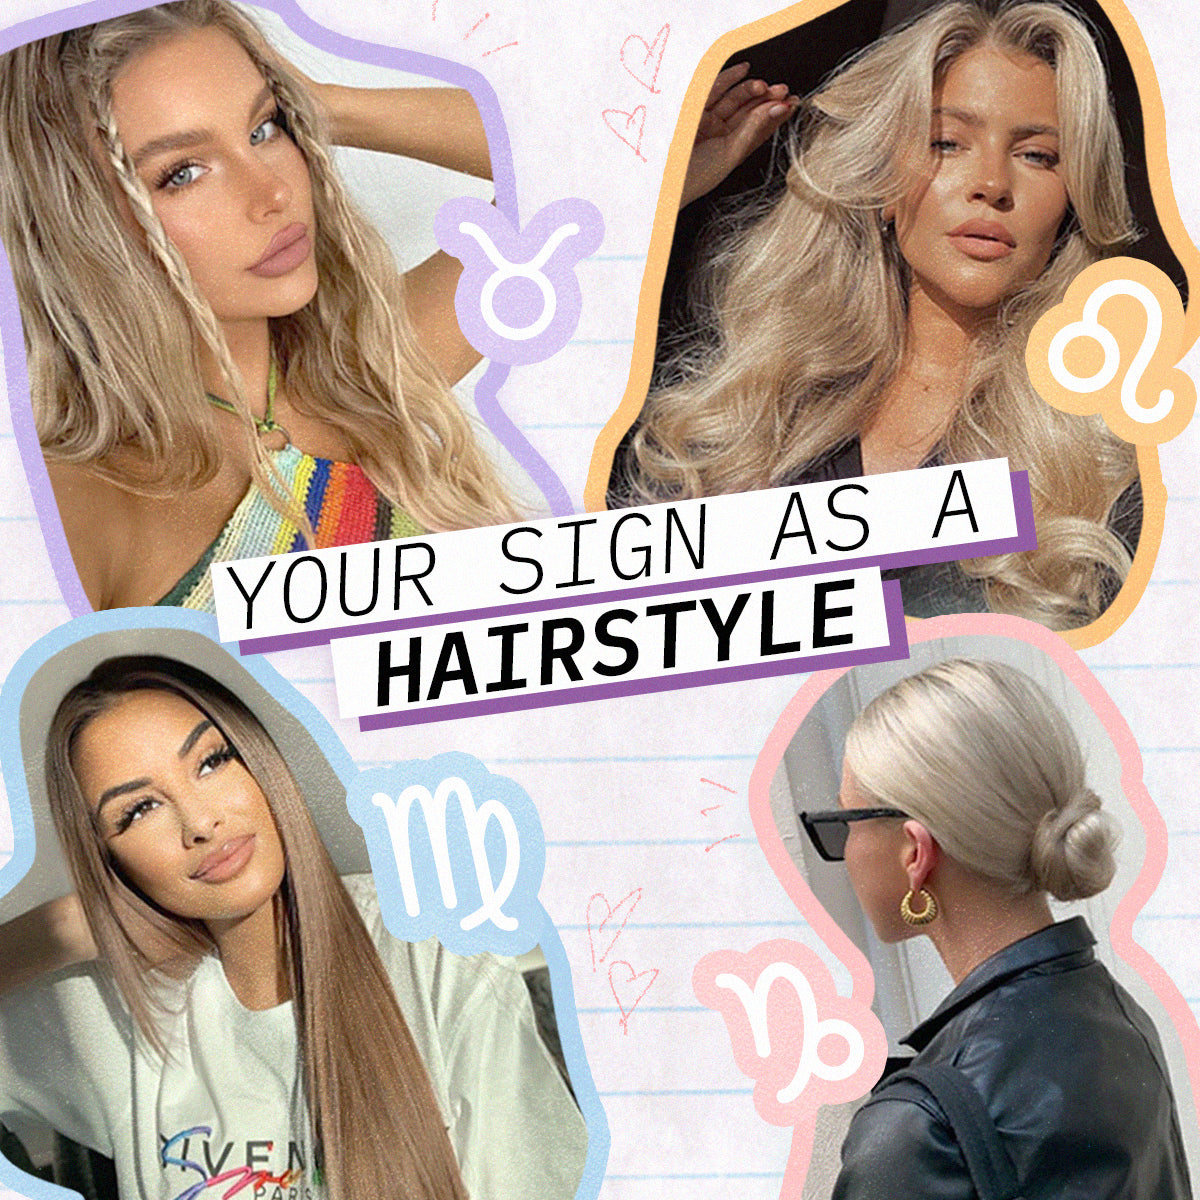 Discover Your Signature Hairstyle Based on Your Zodiac Sign featured image